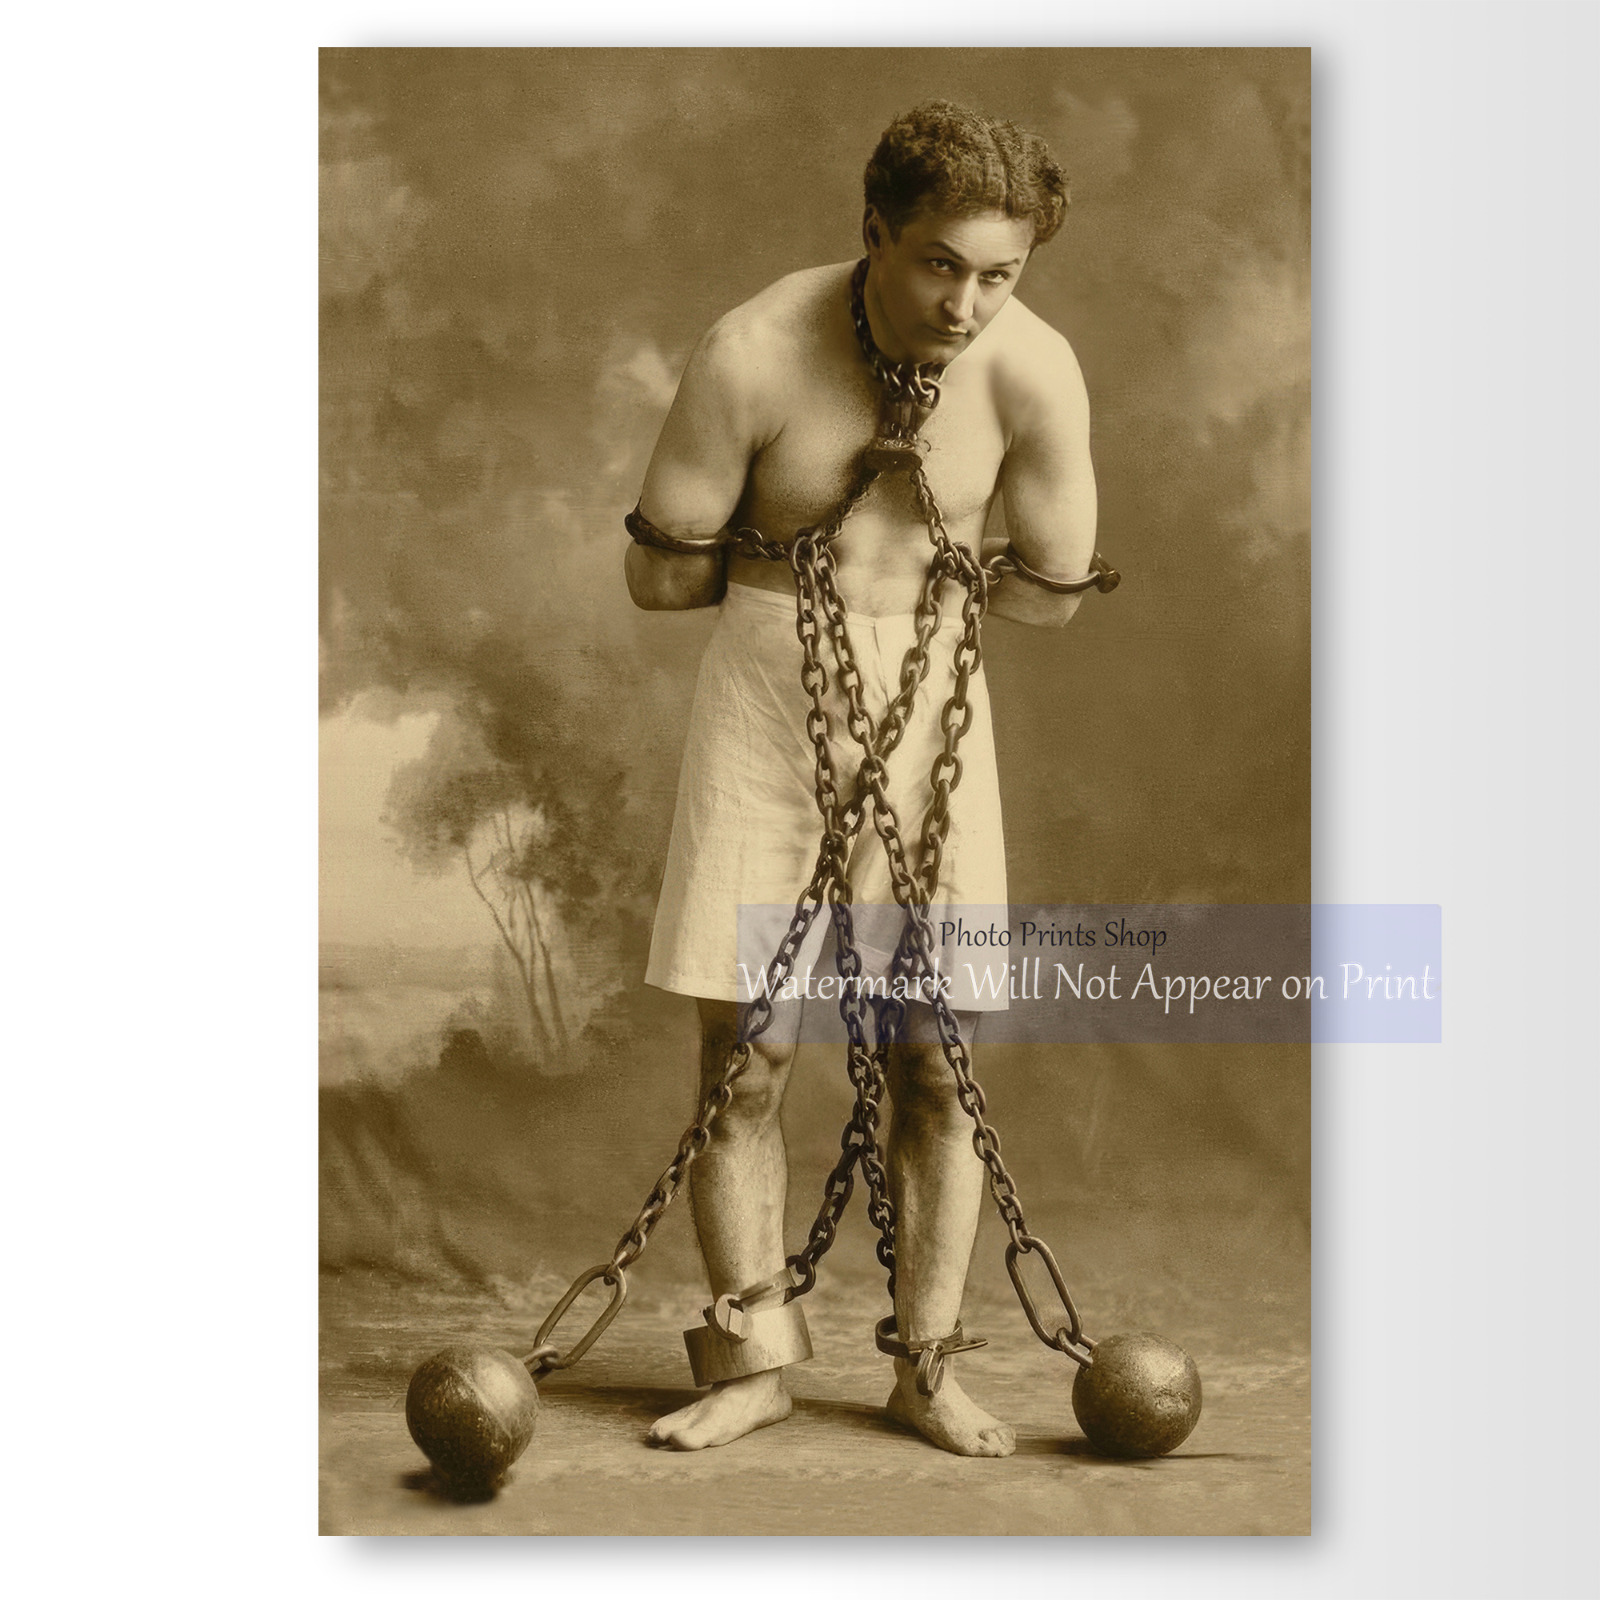 Famous Escape Artist Magician Harry Houdini In Chains Vintage Photo Print